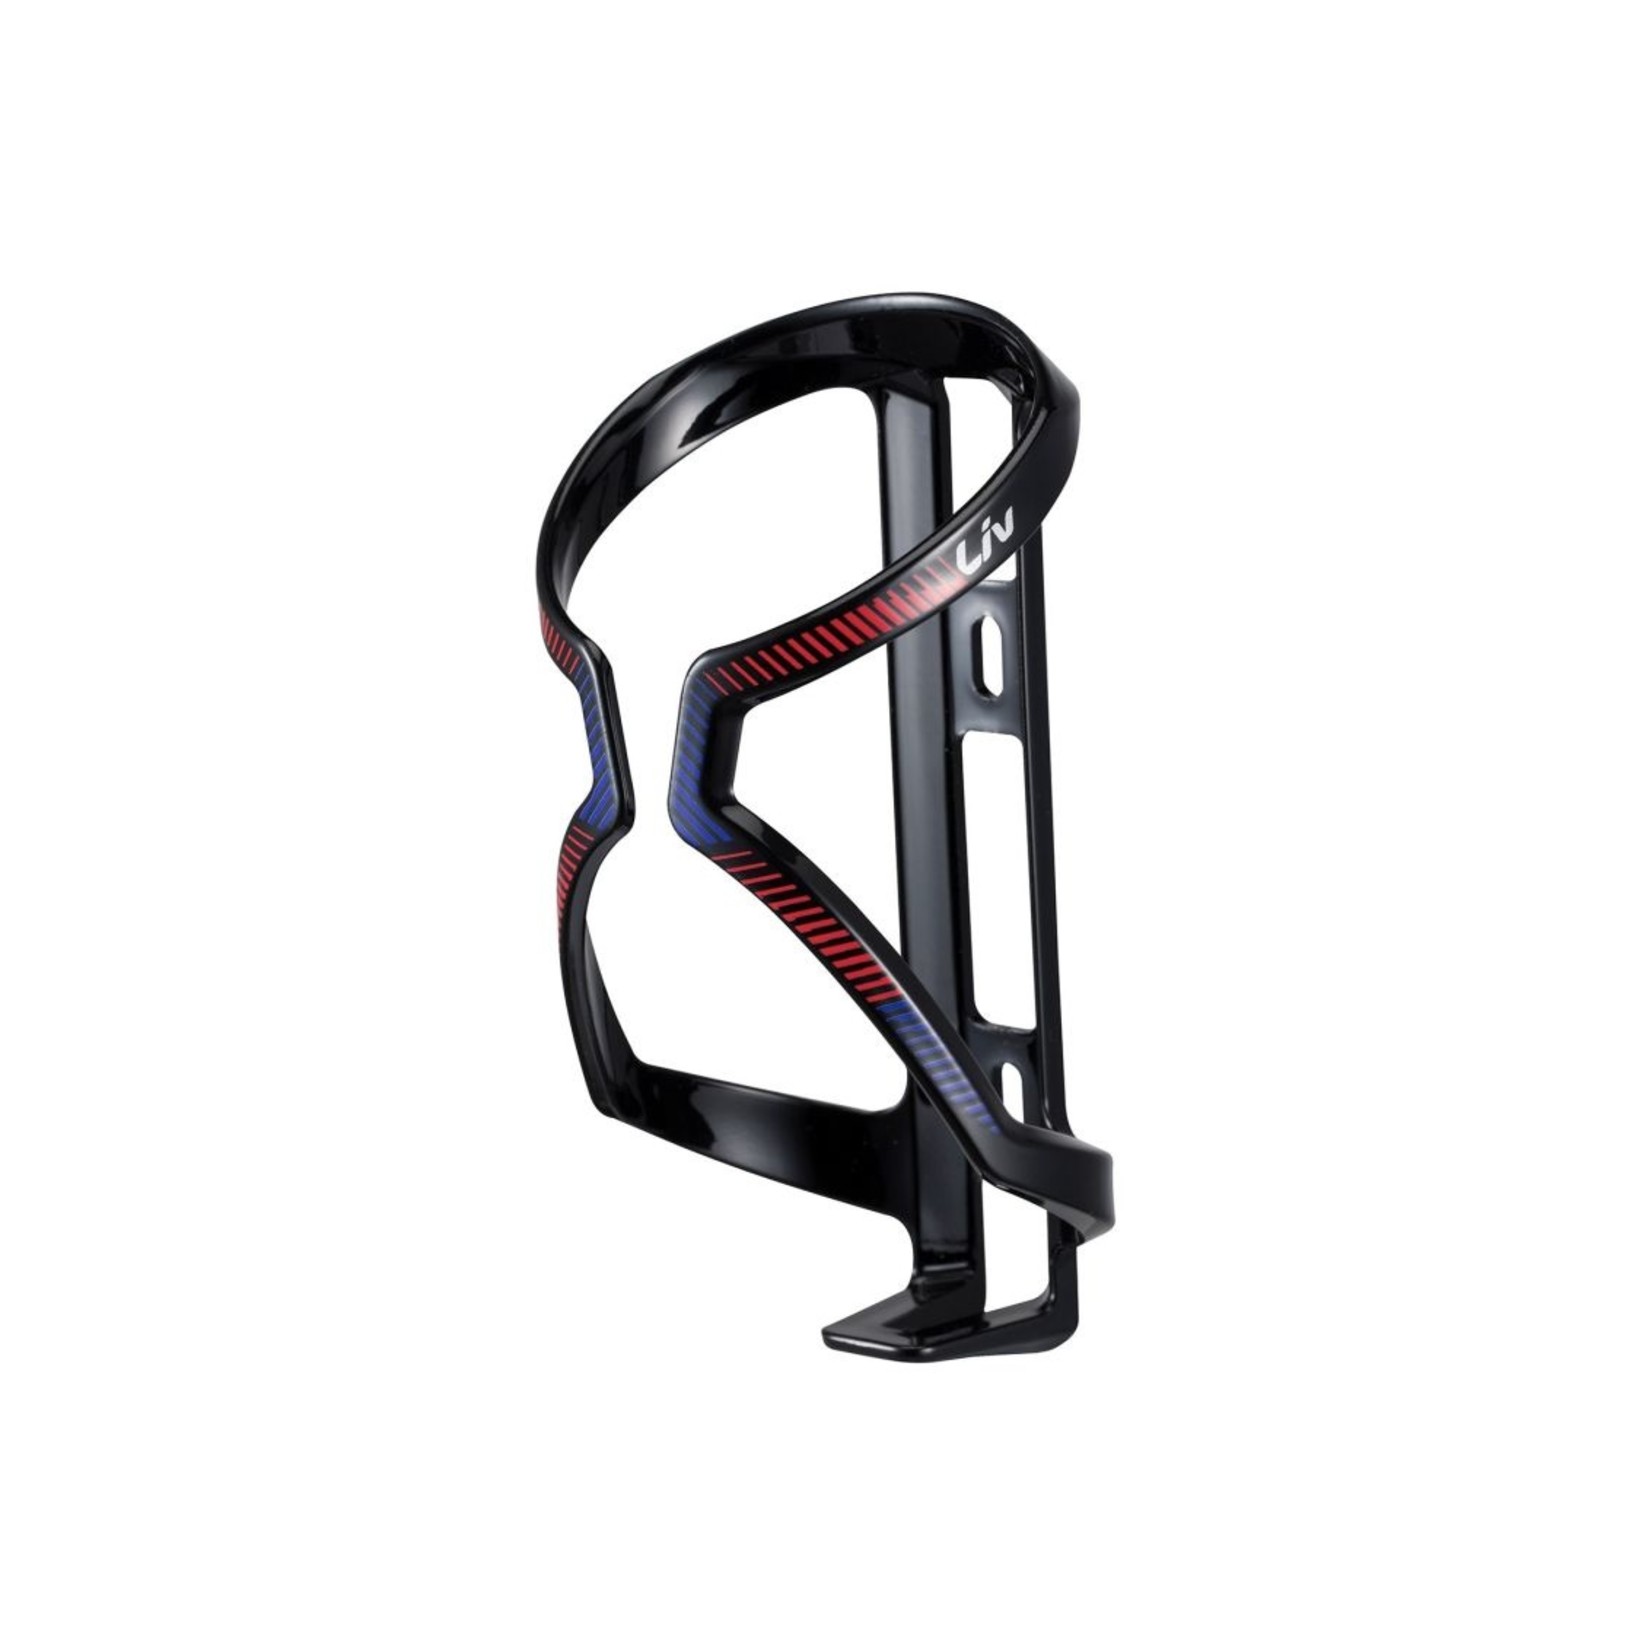 Giant Liv Airway Sport Bottle Cage